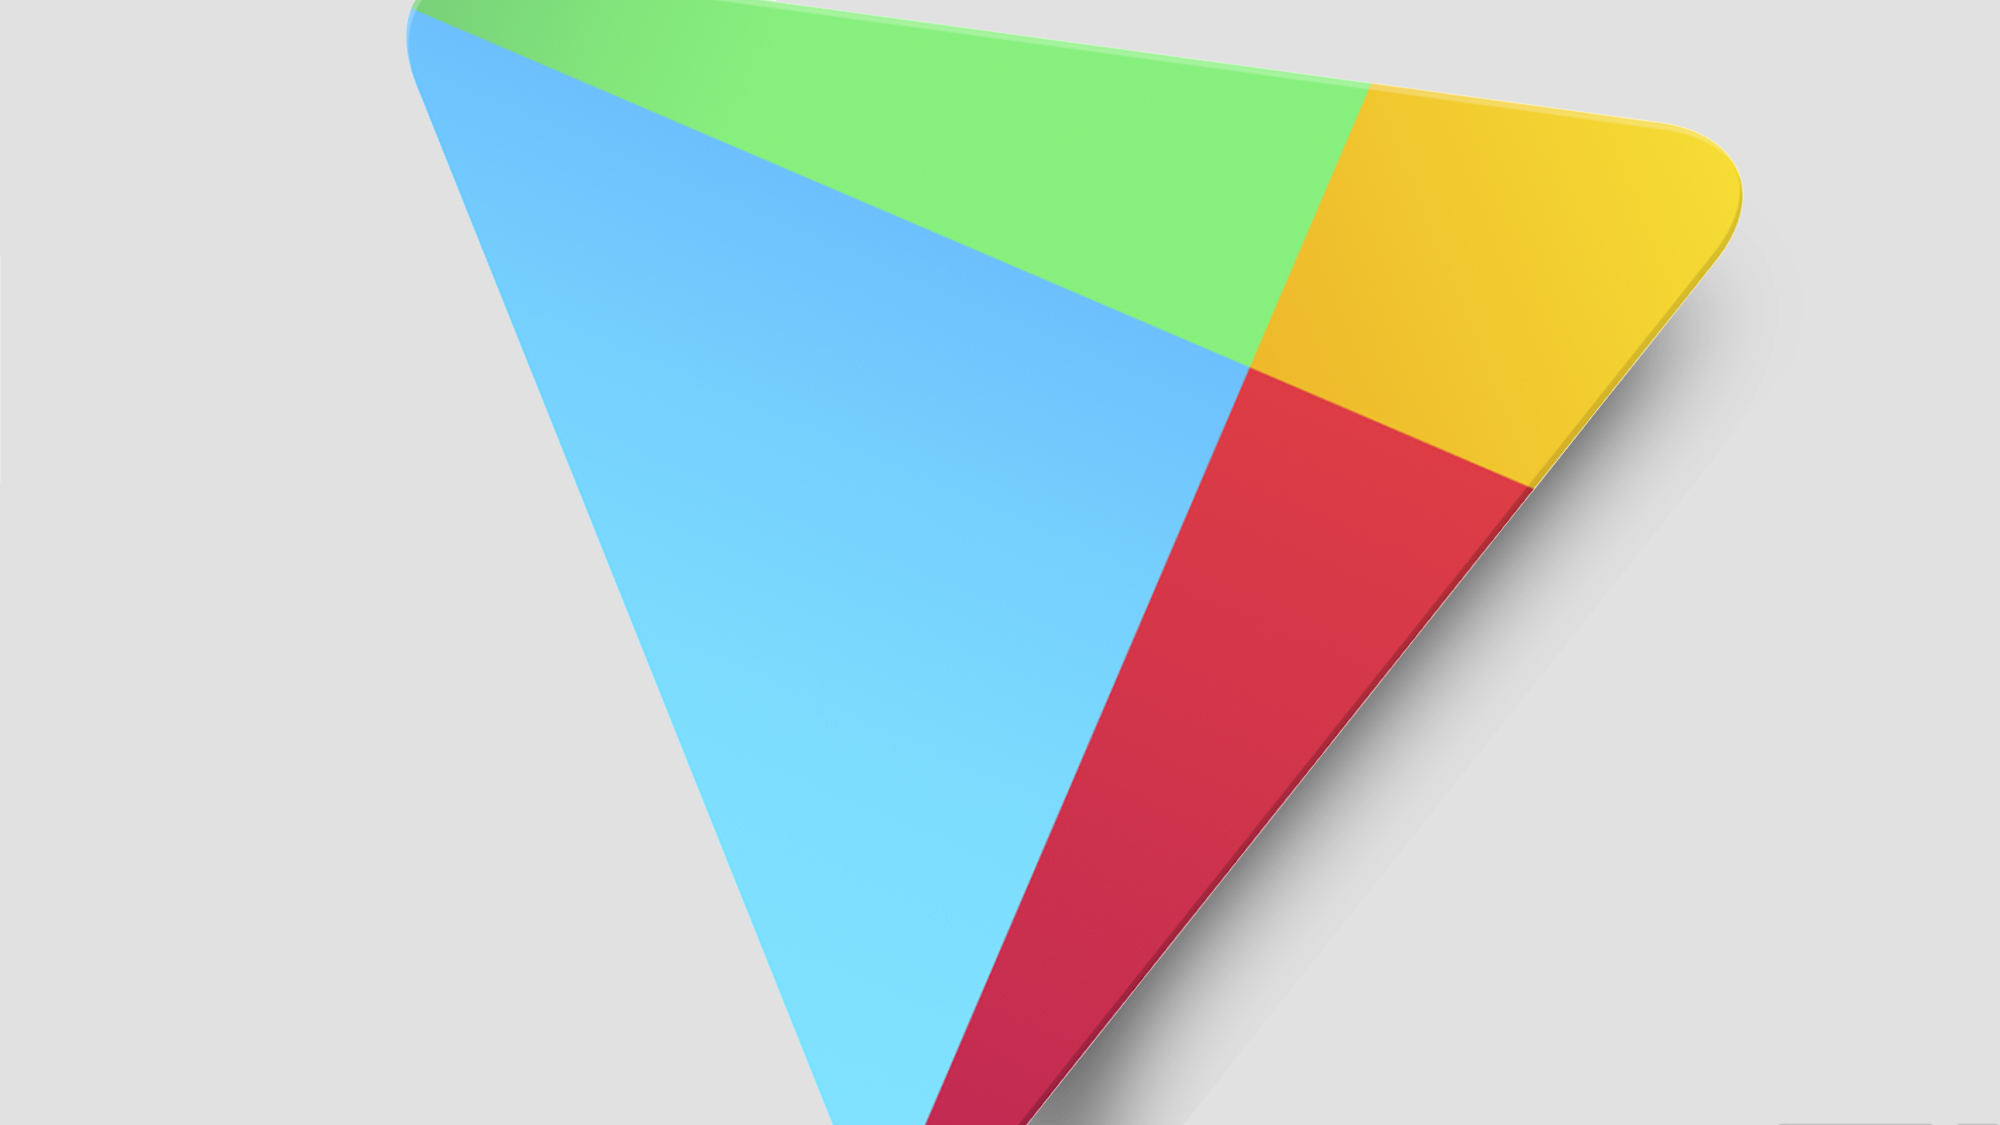 Download new Google Play Store Apk • Audio Reviews and News